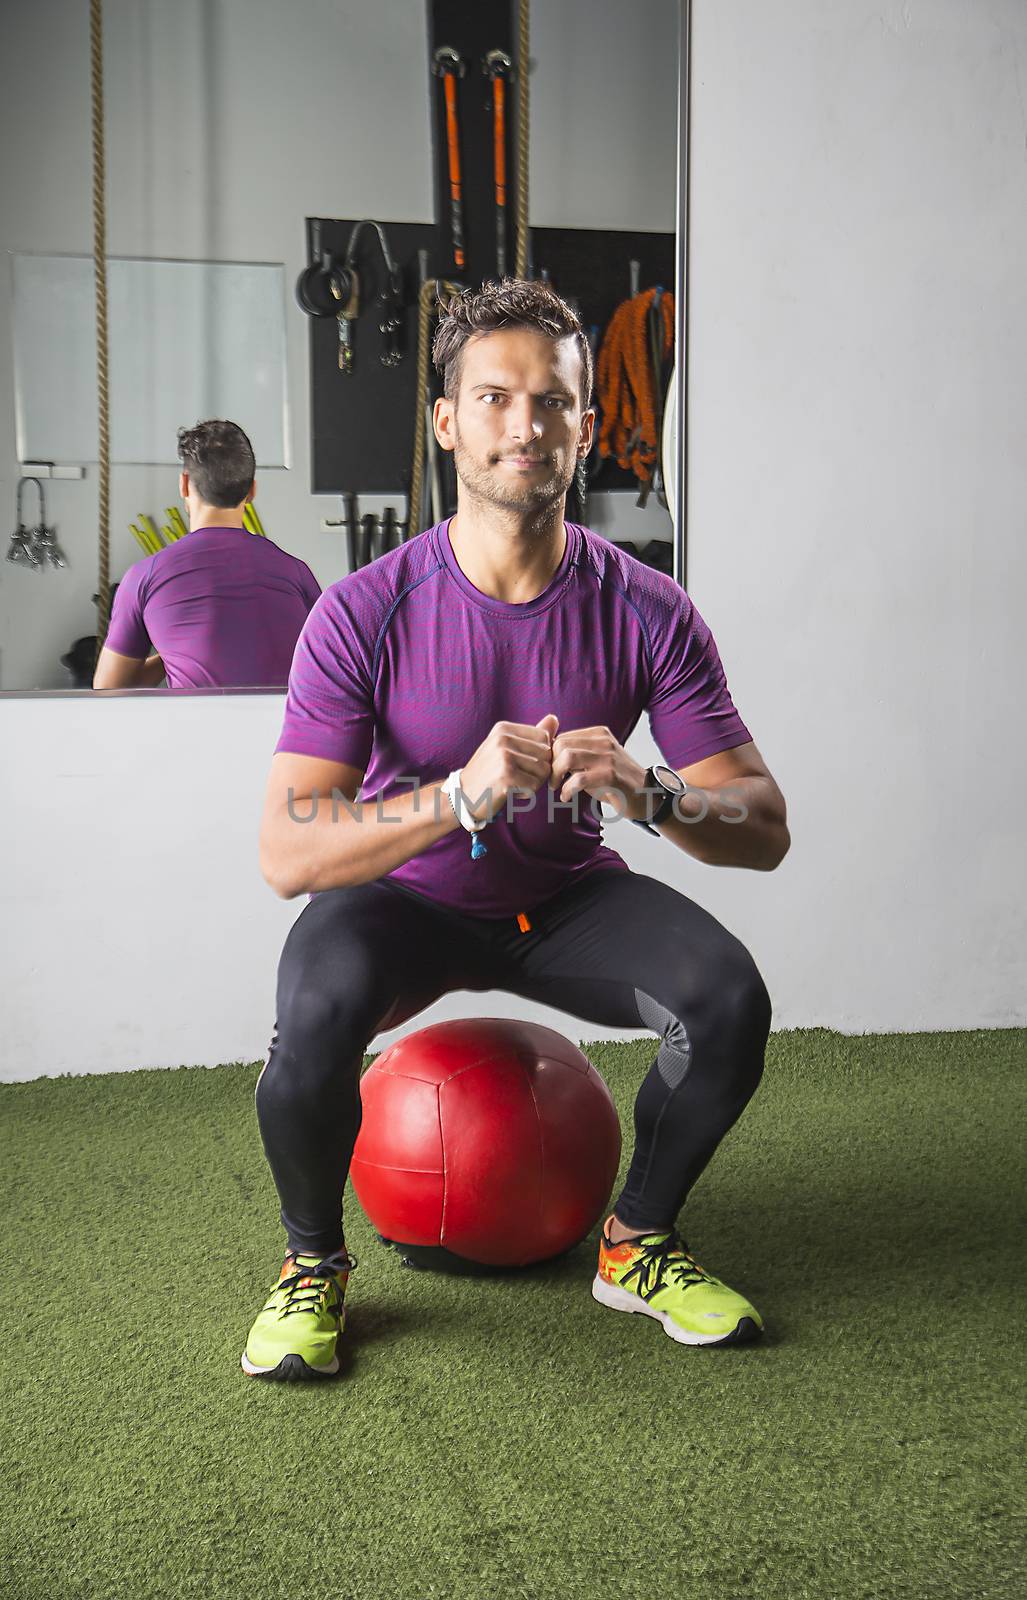 Man in his thirties doing a squat over a red medicine ball